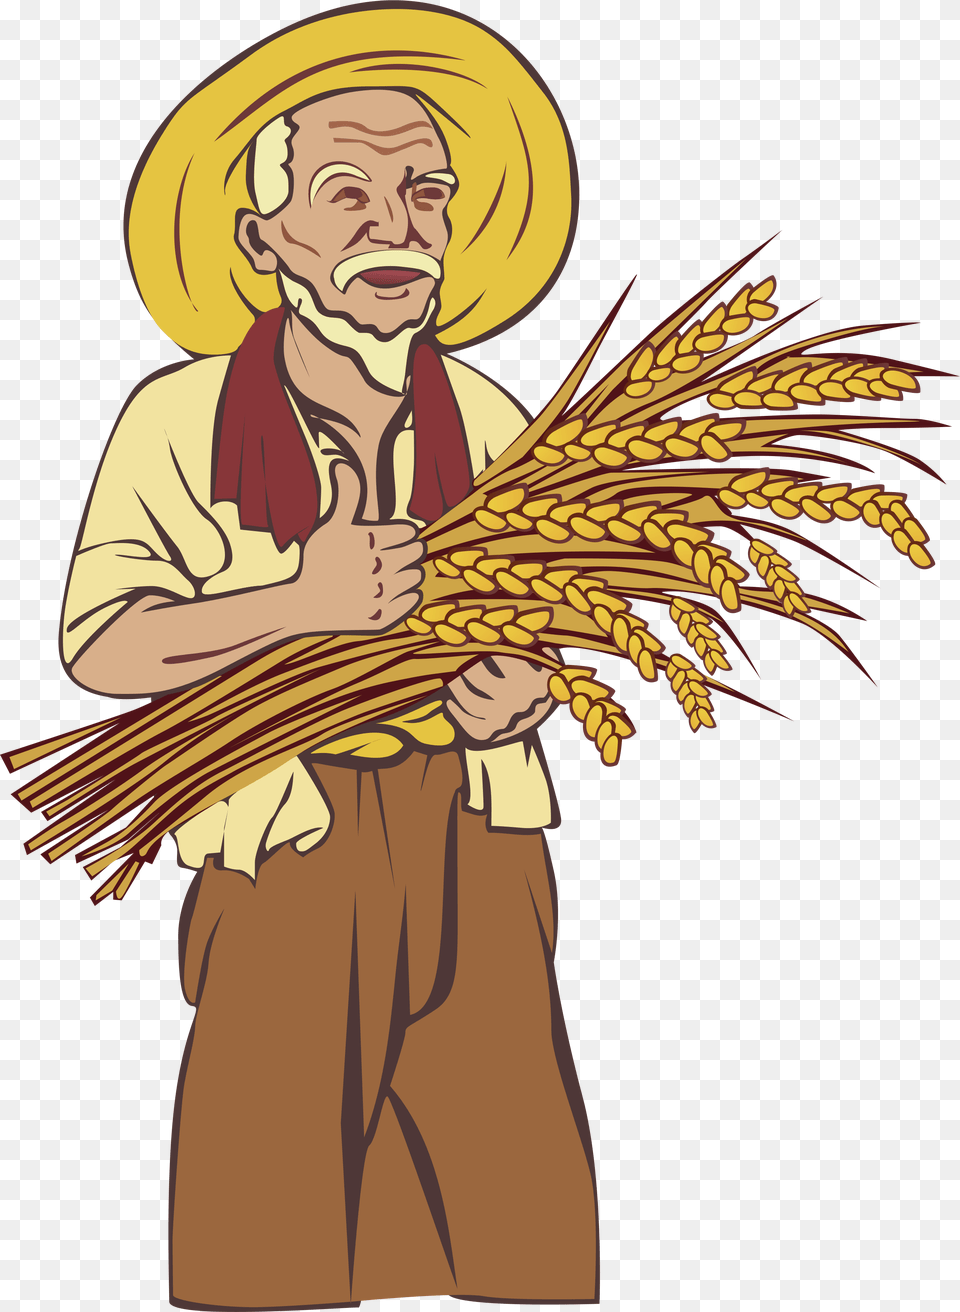 Farmer Vector Element Farmer, Agriculture, Rural, Outdoors, Nature Png Image